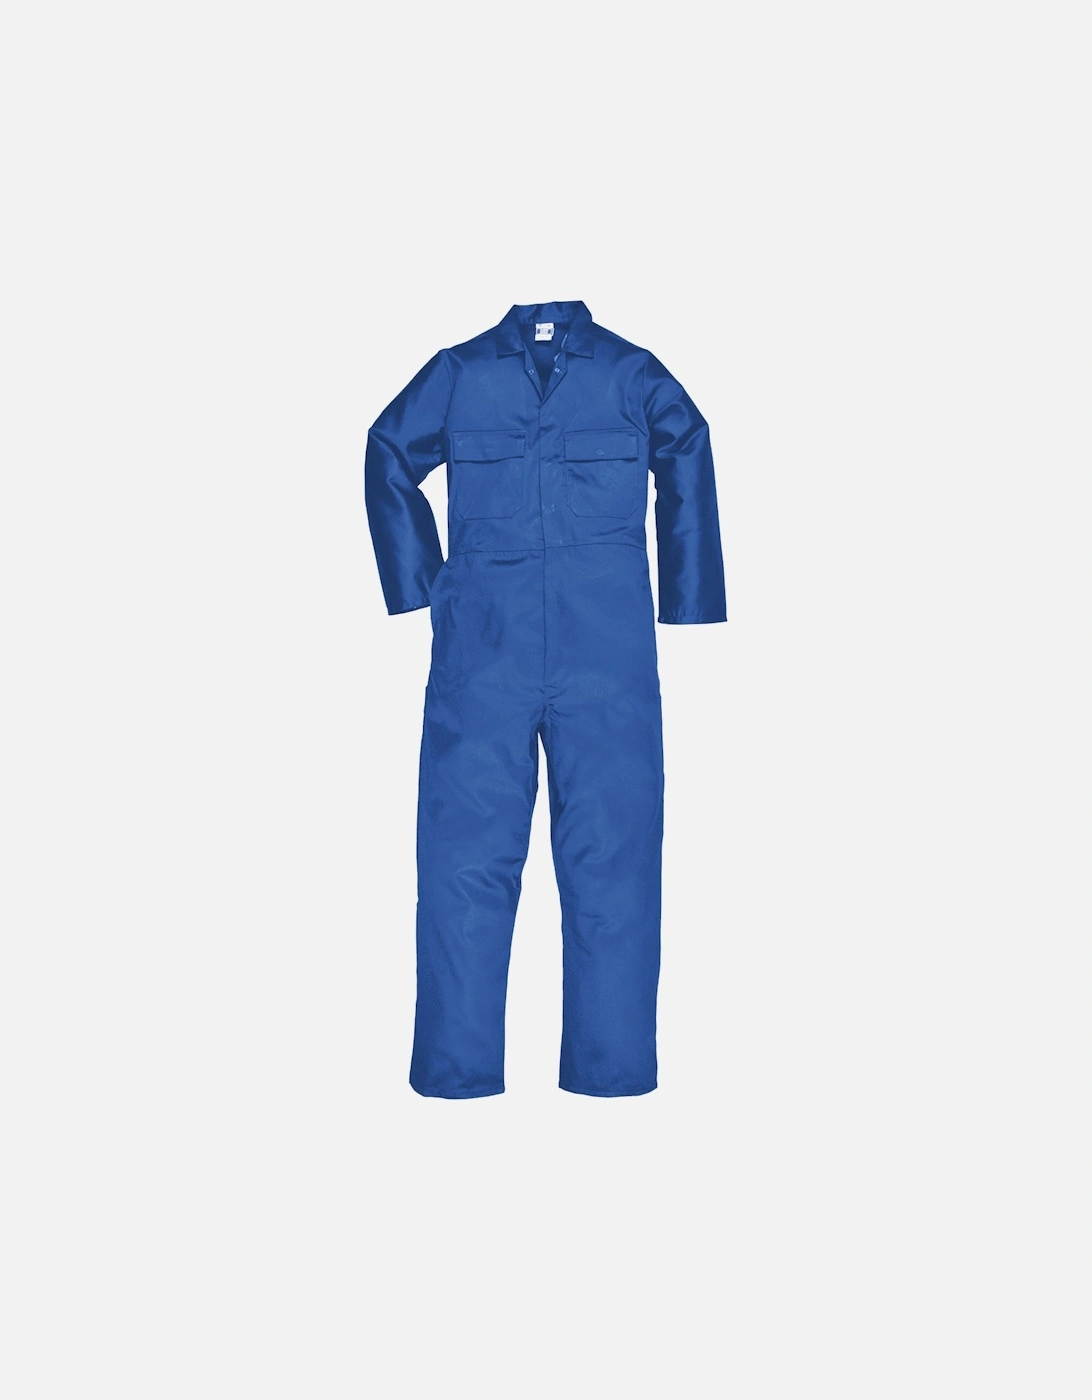 Mens Euro Work Polycotton Coverall (S999) / Workwear (Pack of 2)